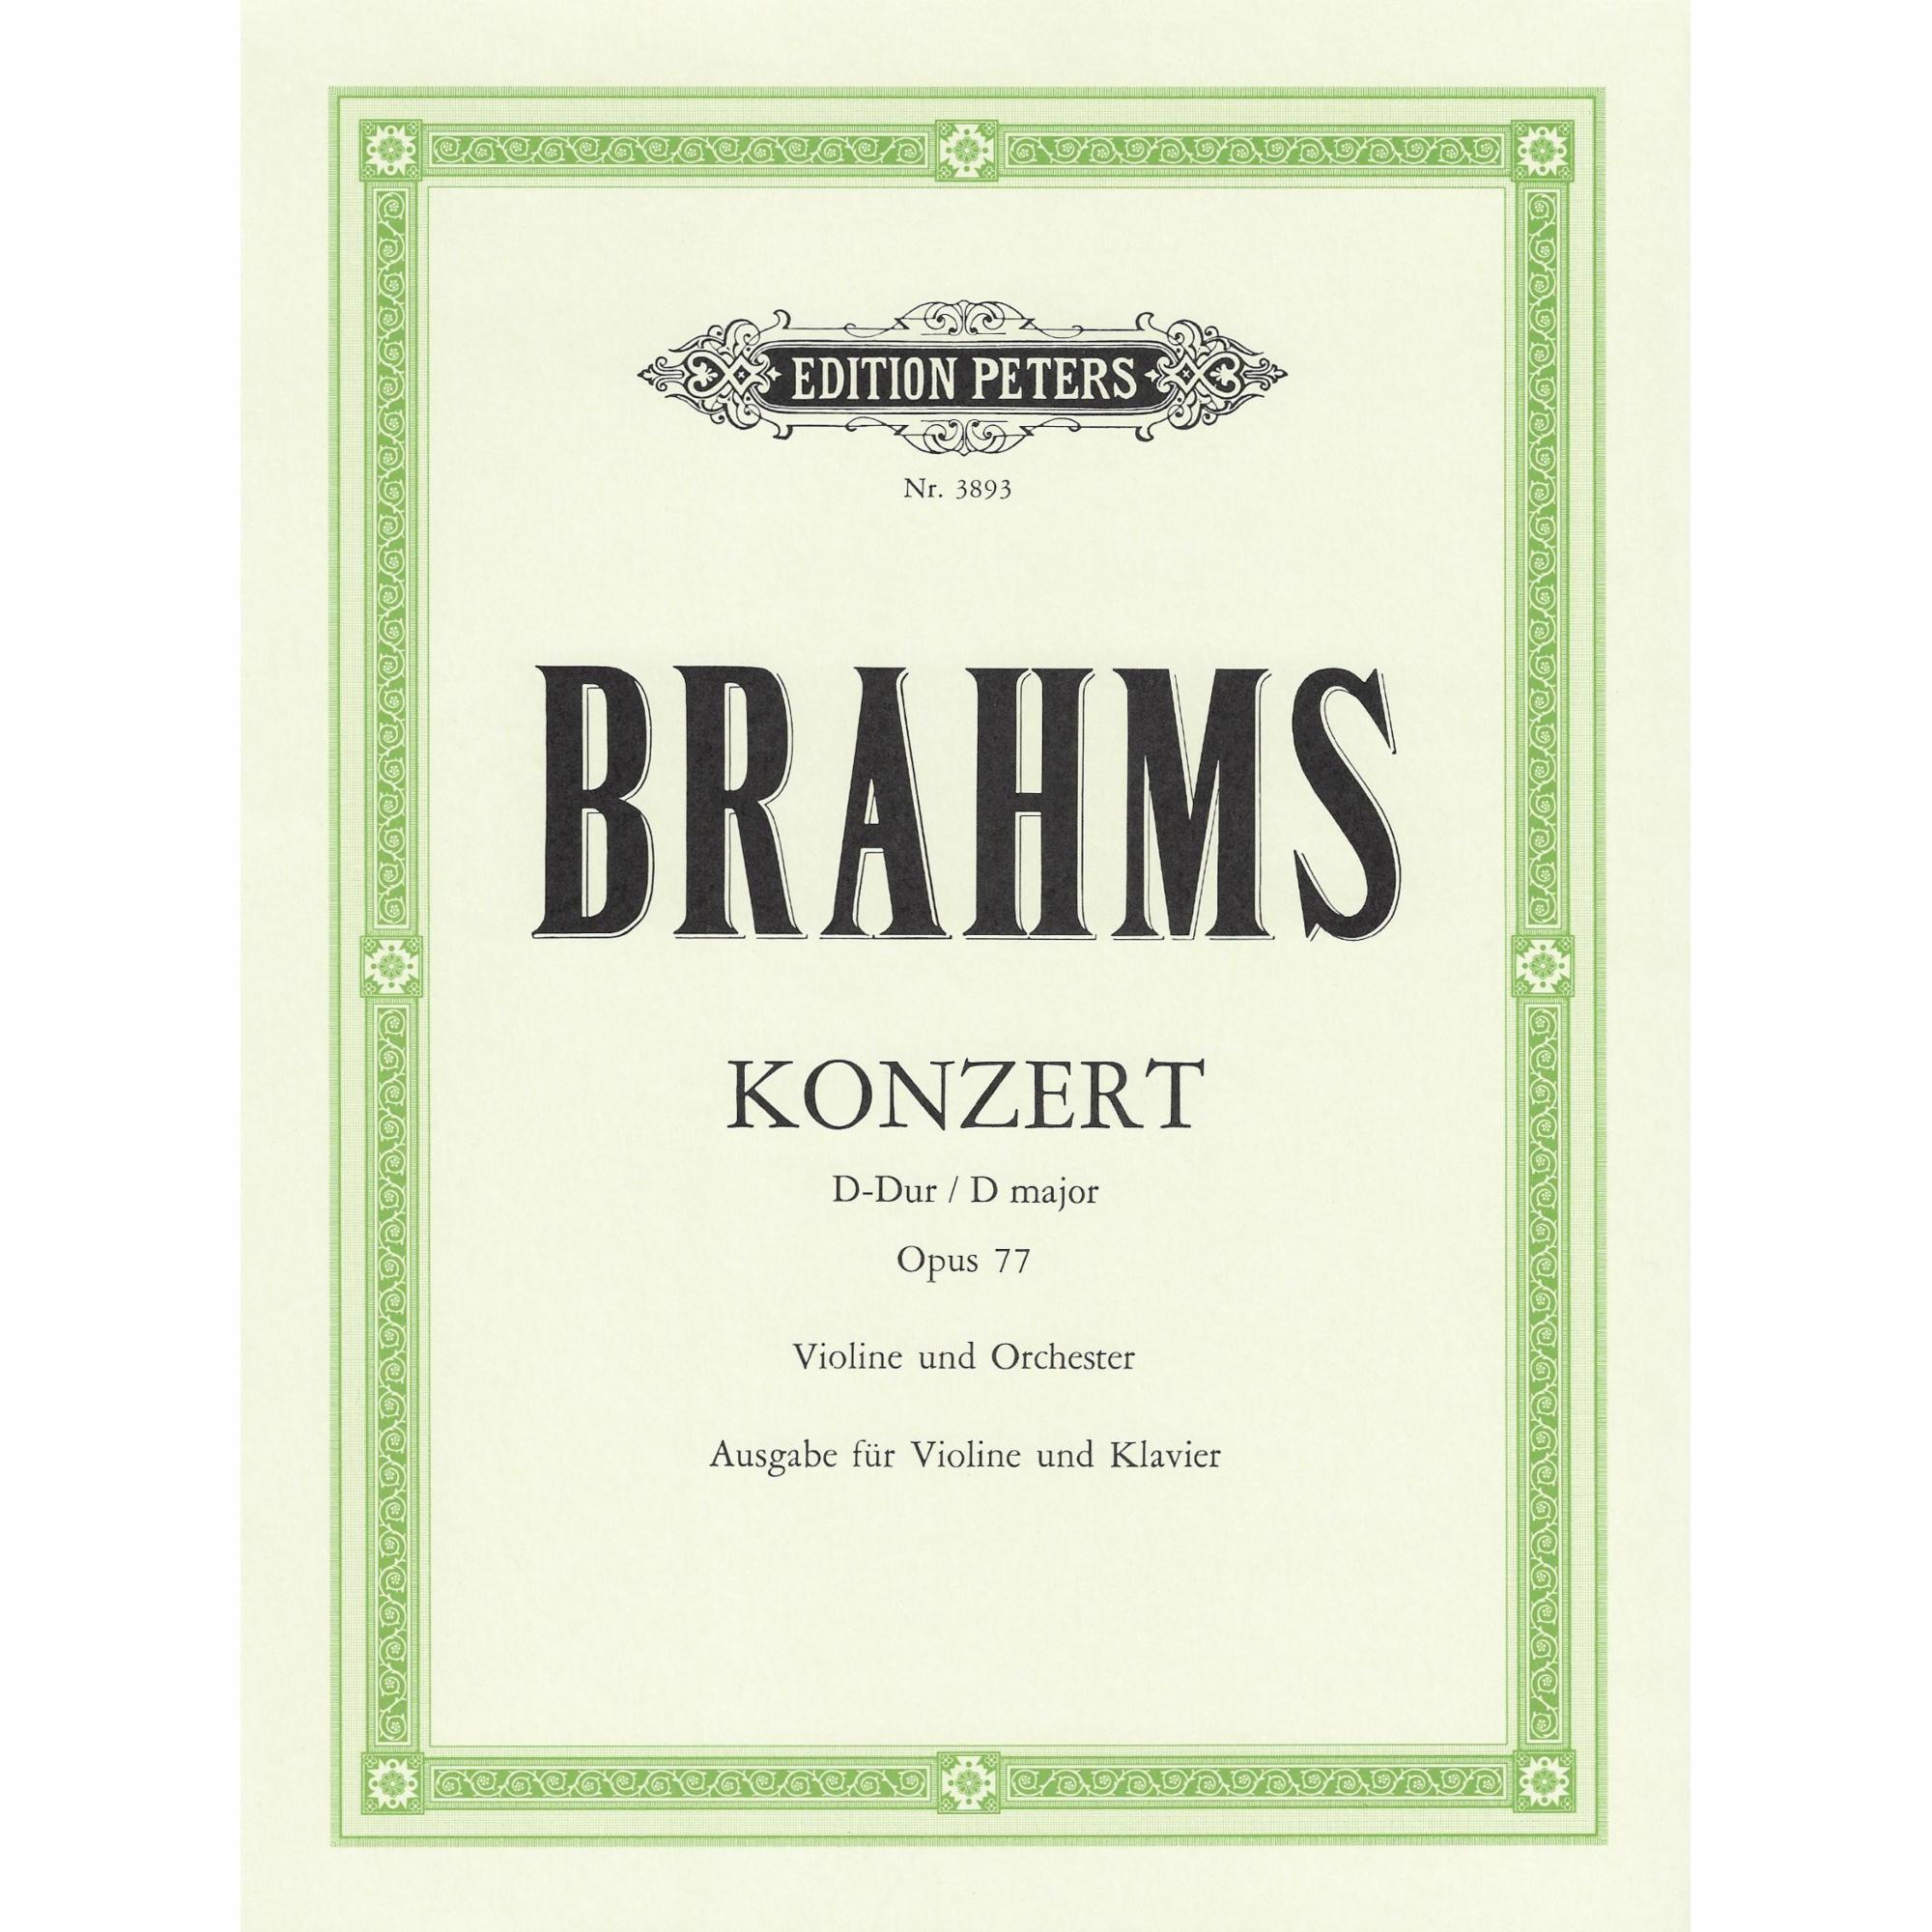 Brahms -- Concerto in D Major, Op. 77 for Violin and Piano